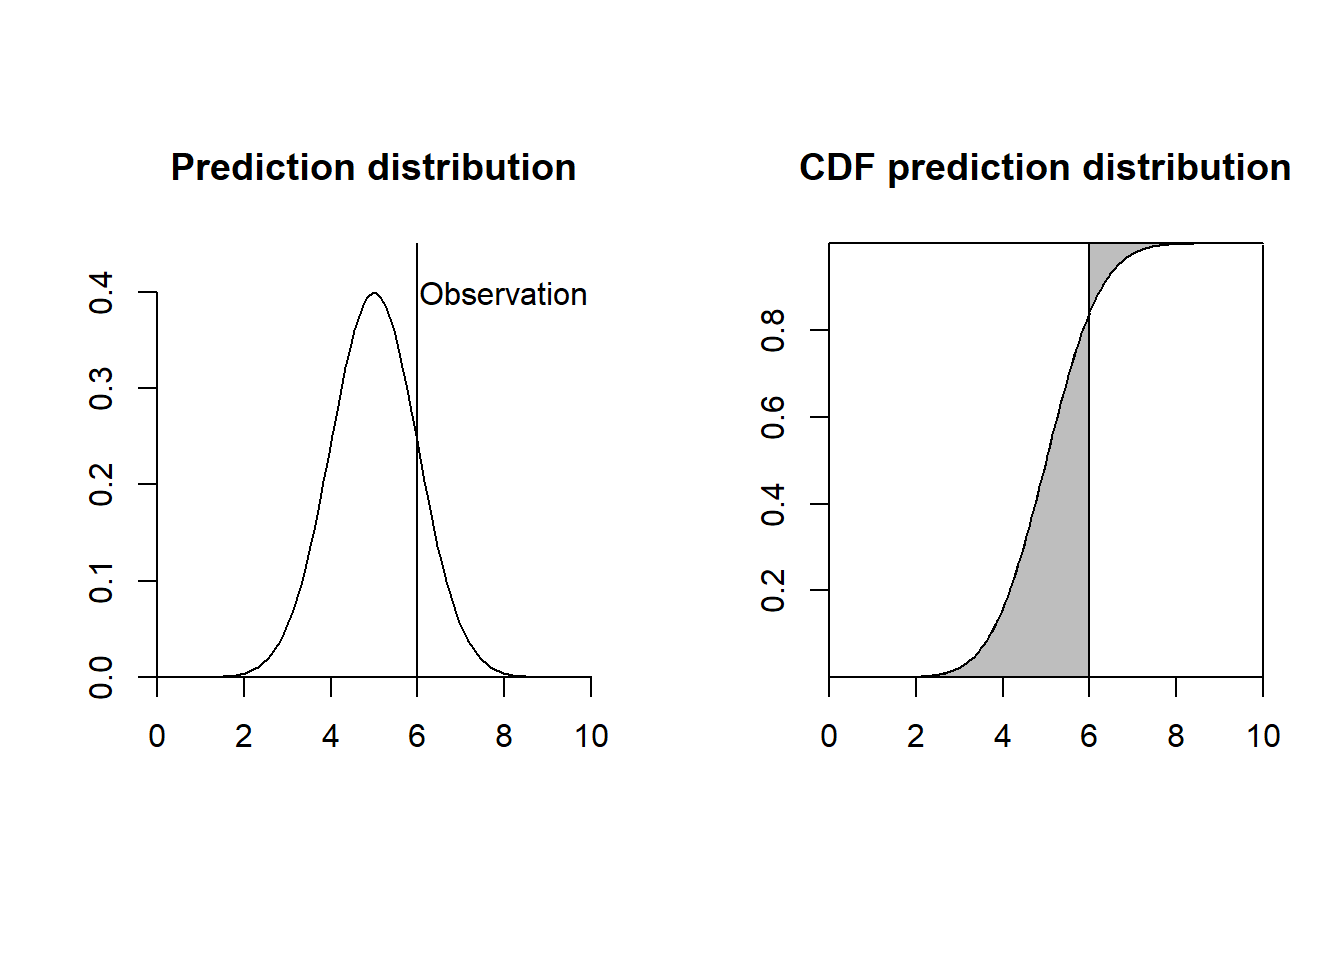 Left: Observation and prediction distribution. Right: Continuous Ranked Probability Score (CRPS) represented as the gray area between the cumulative distribution functions.